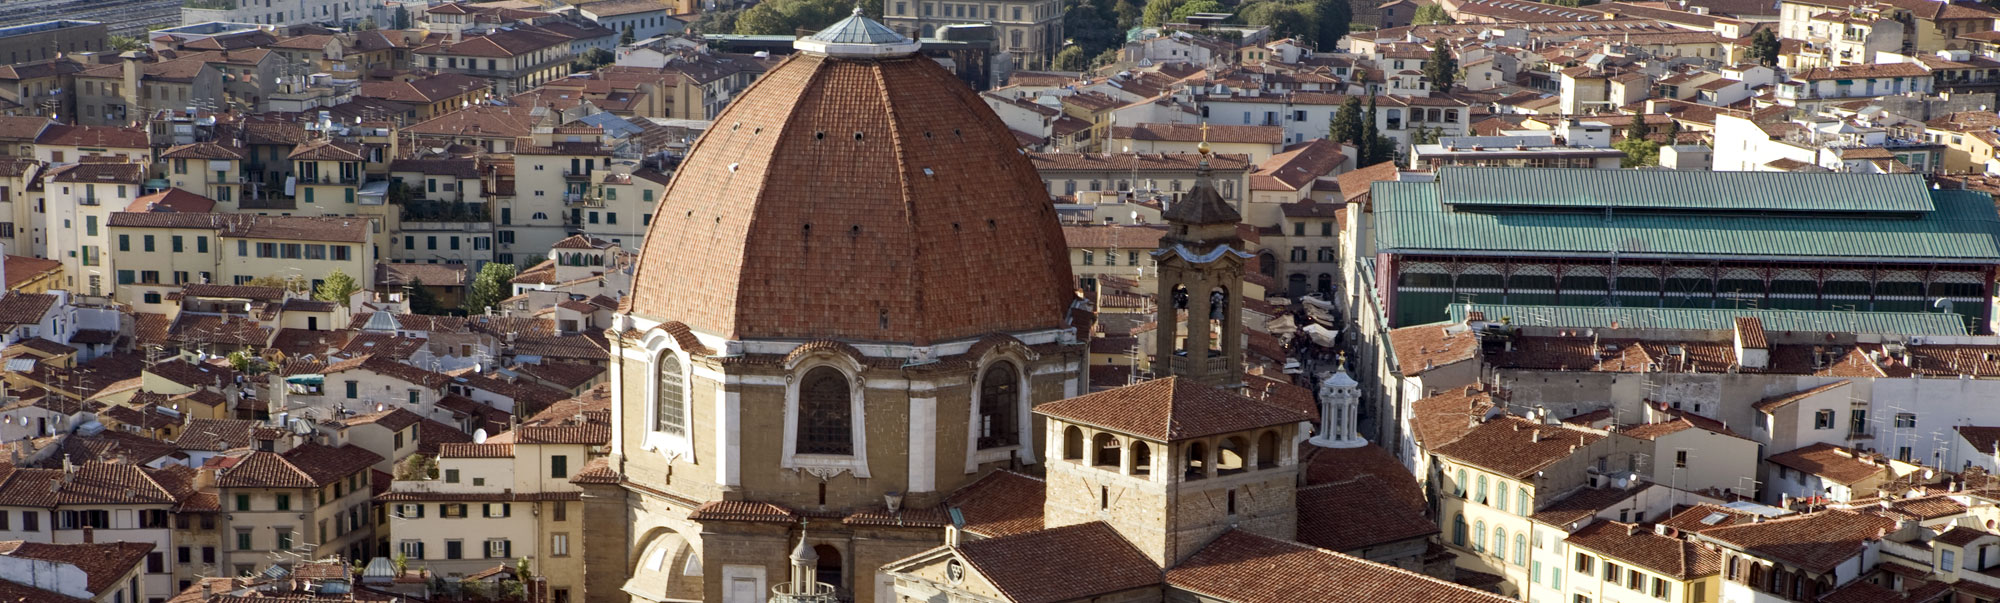 Hotel Palazzo Vecchio Florence Center - Official Site | 3 Stars Hotel Firenze